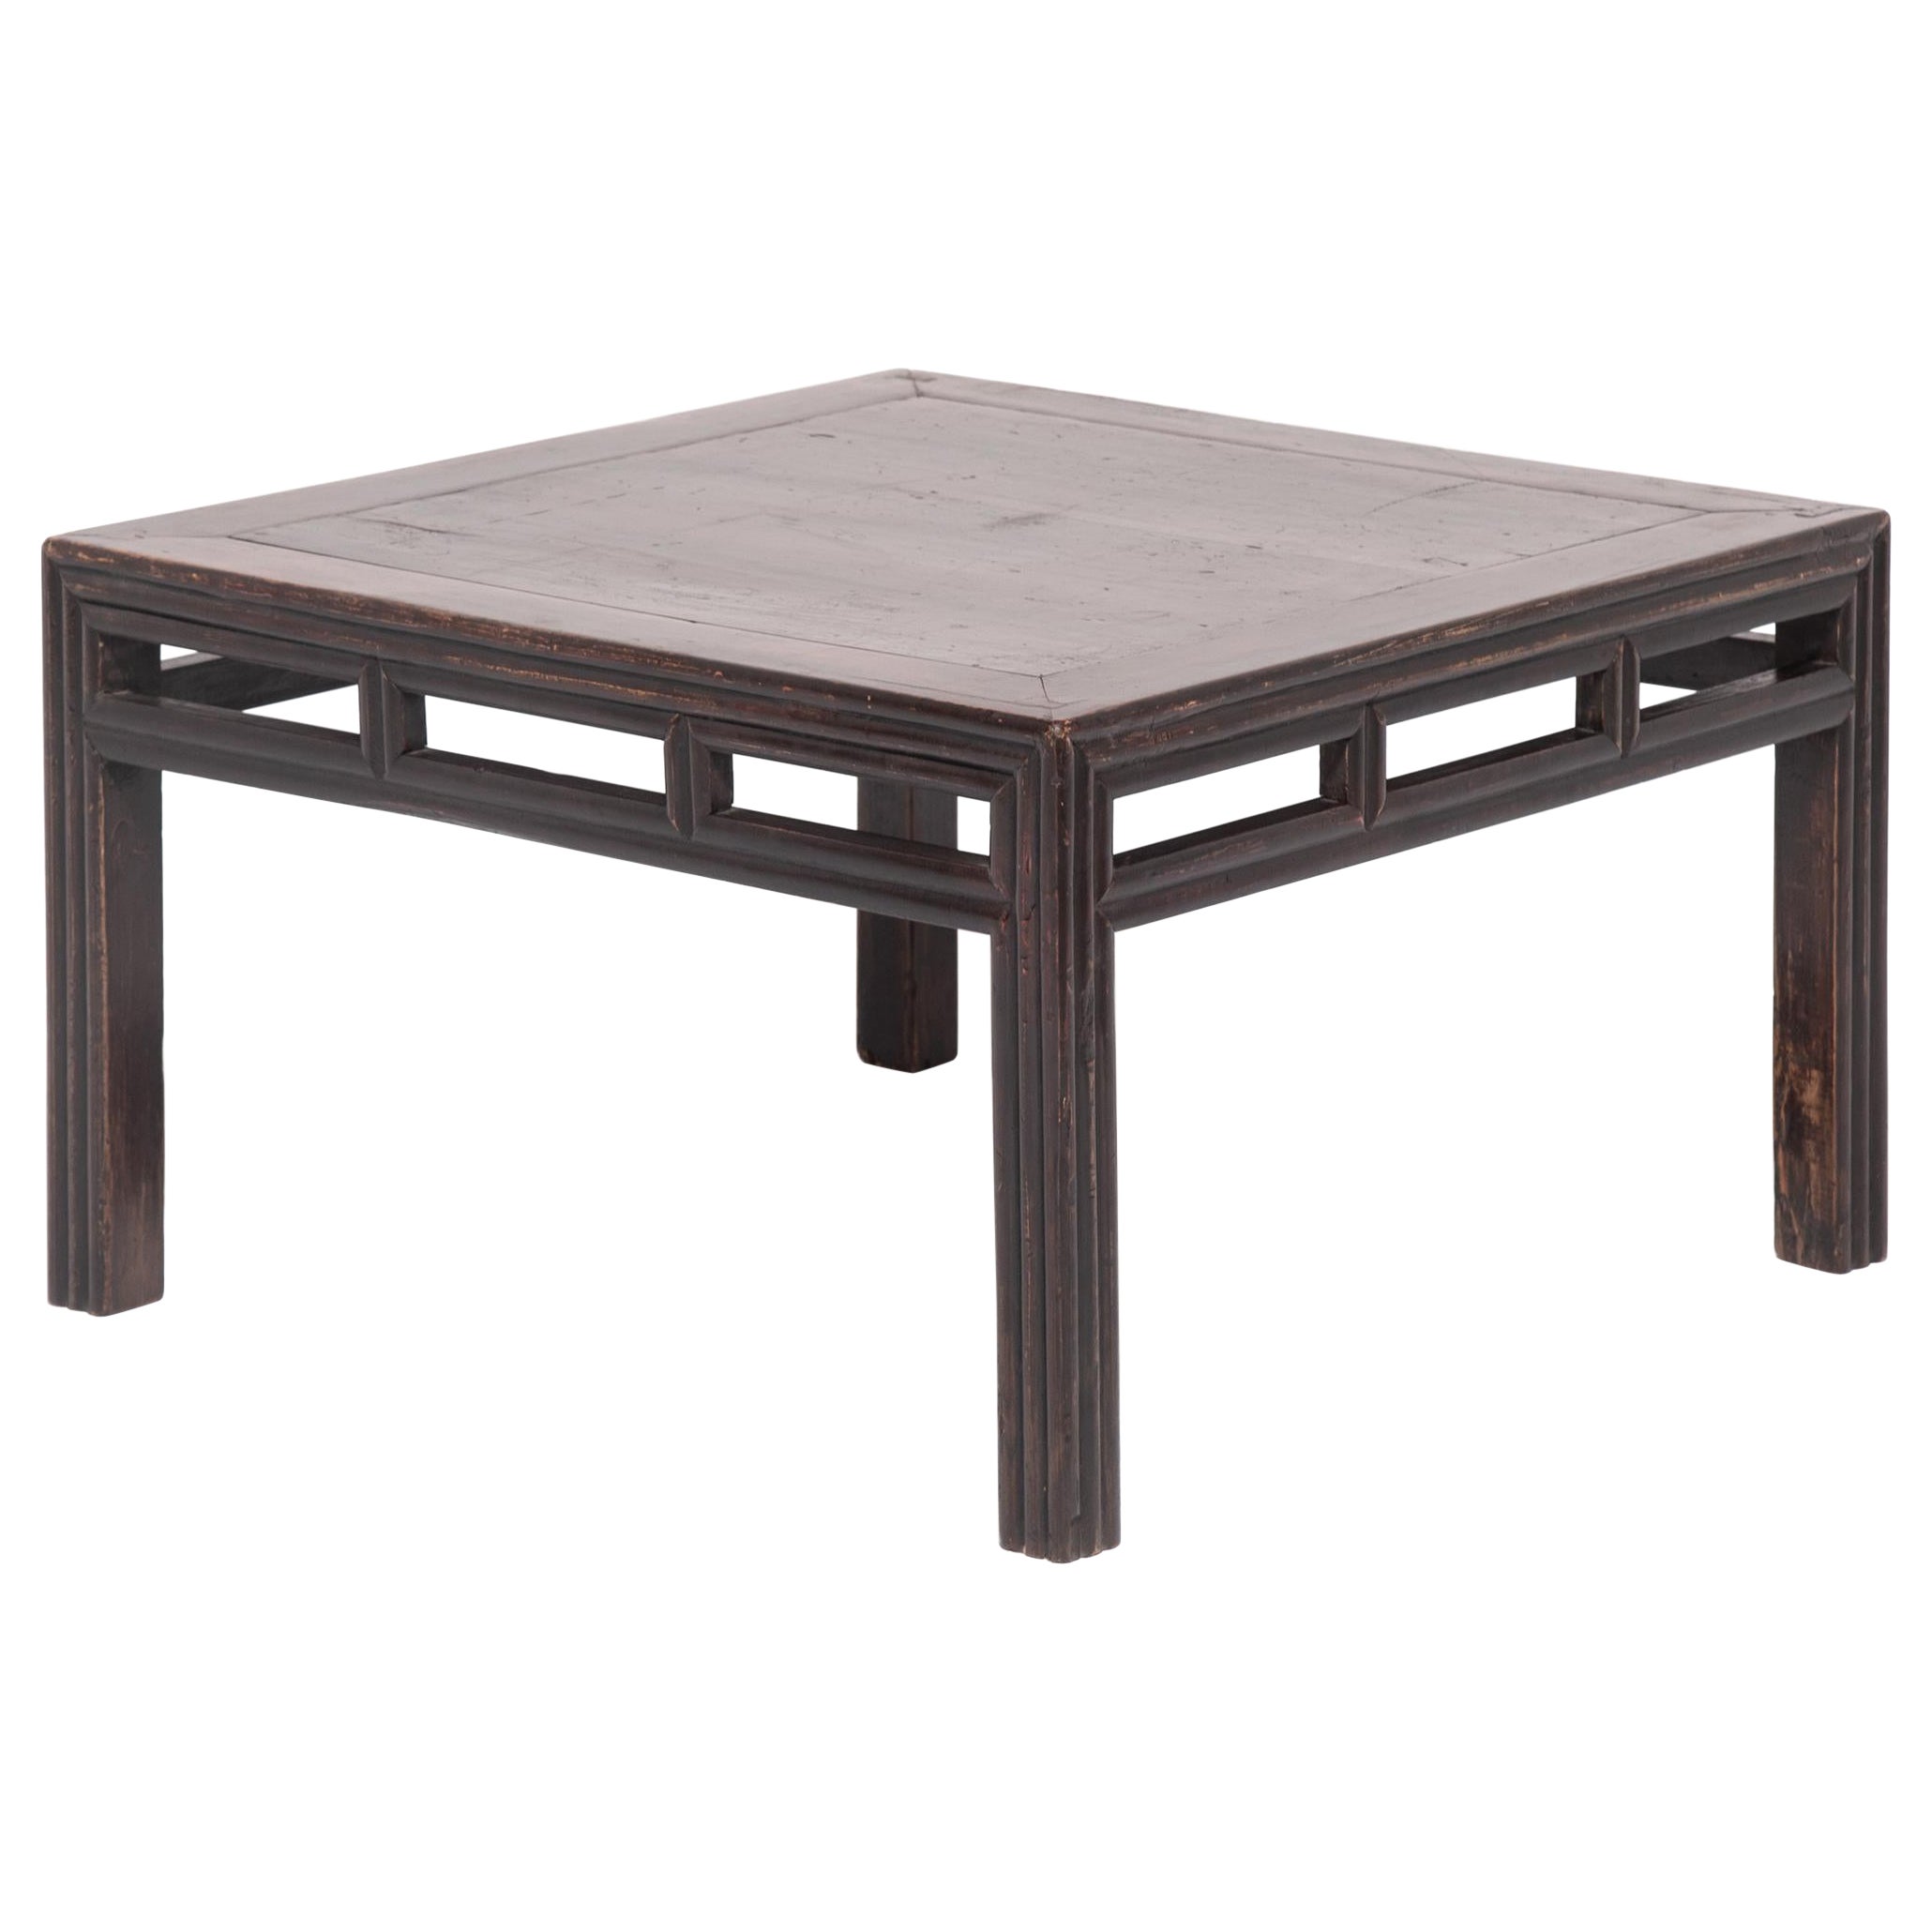 Low Chinese Square Table with Ridged Sides, c. 1900